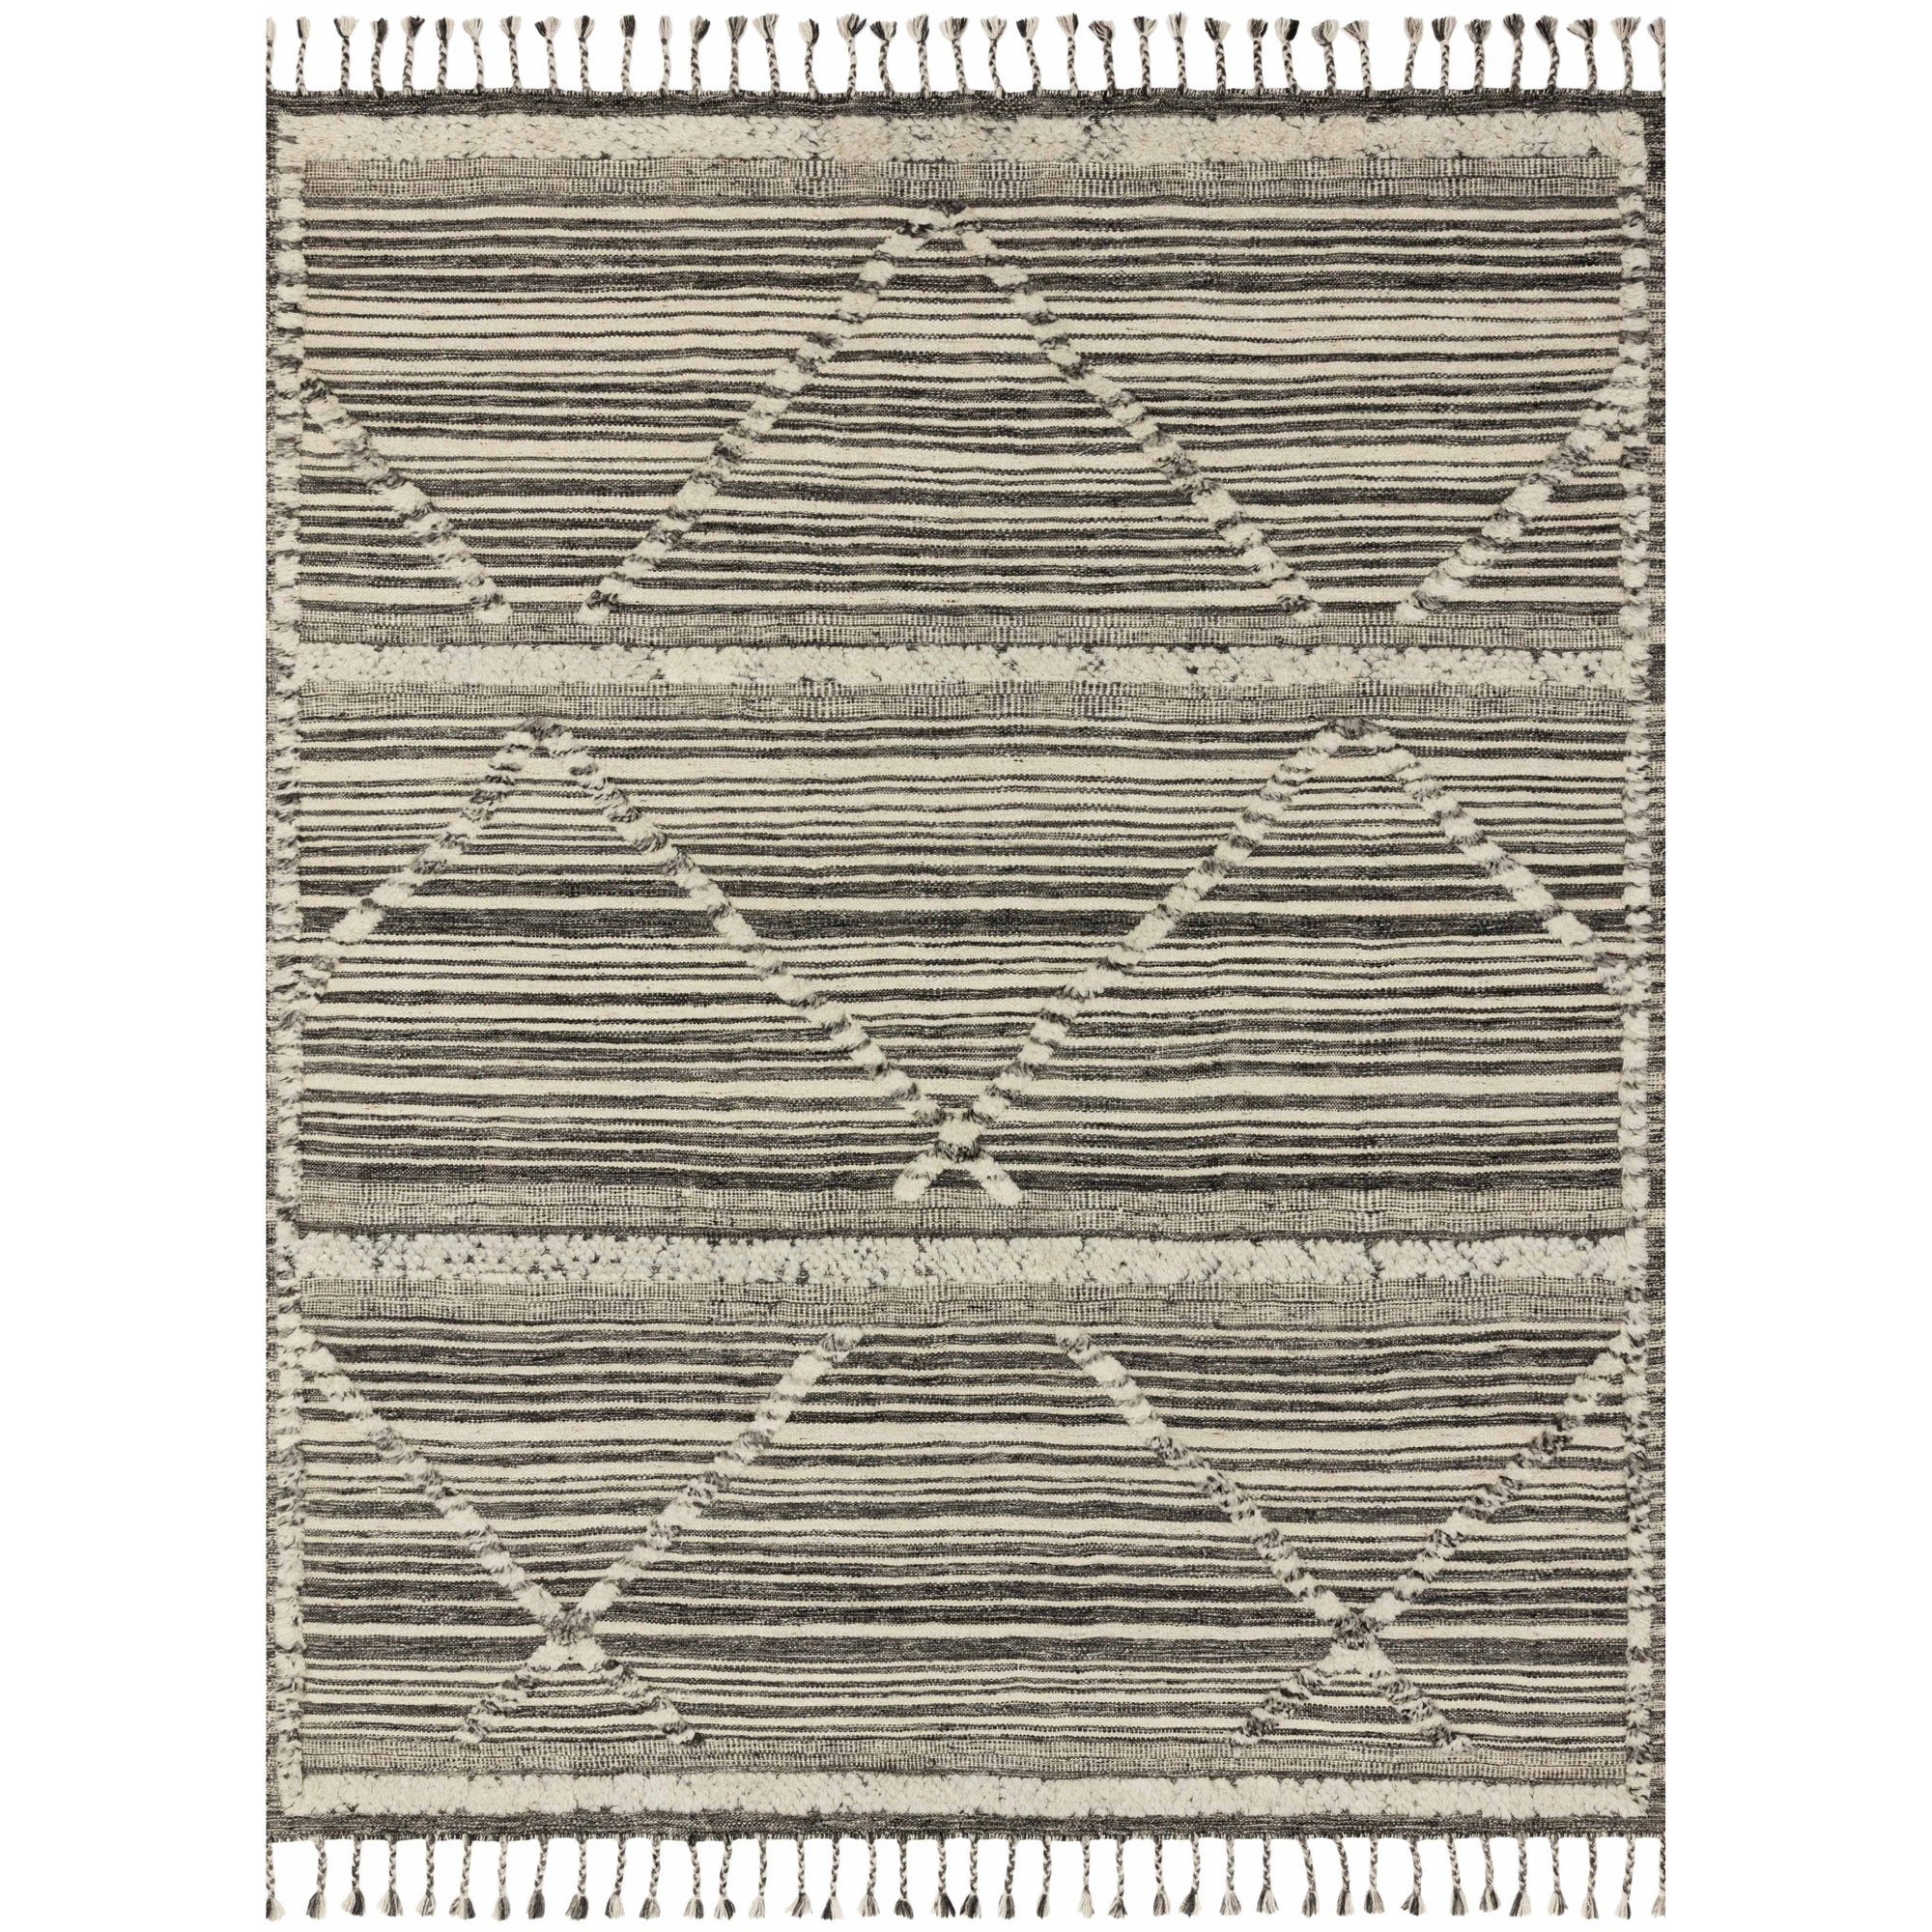 Rugs by Roo Loloi Iman Ivory Charcoal Area Rug in size 18" x 18" Sample